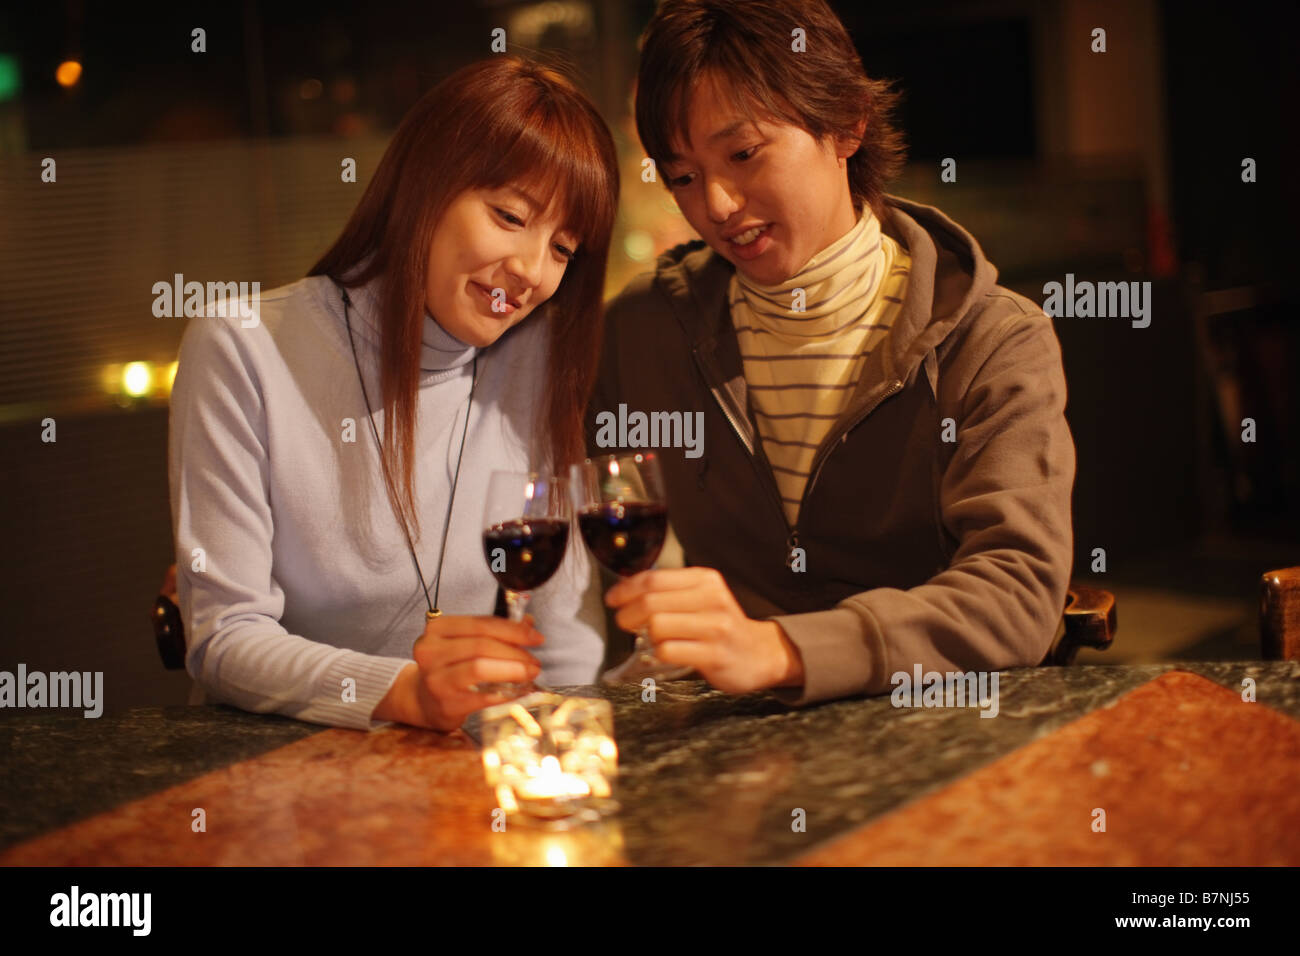 Couple toasting with red wine Banque D'Images